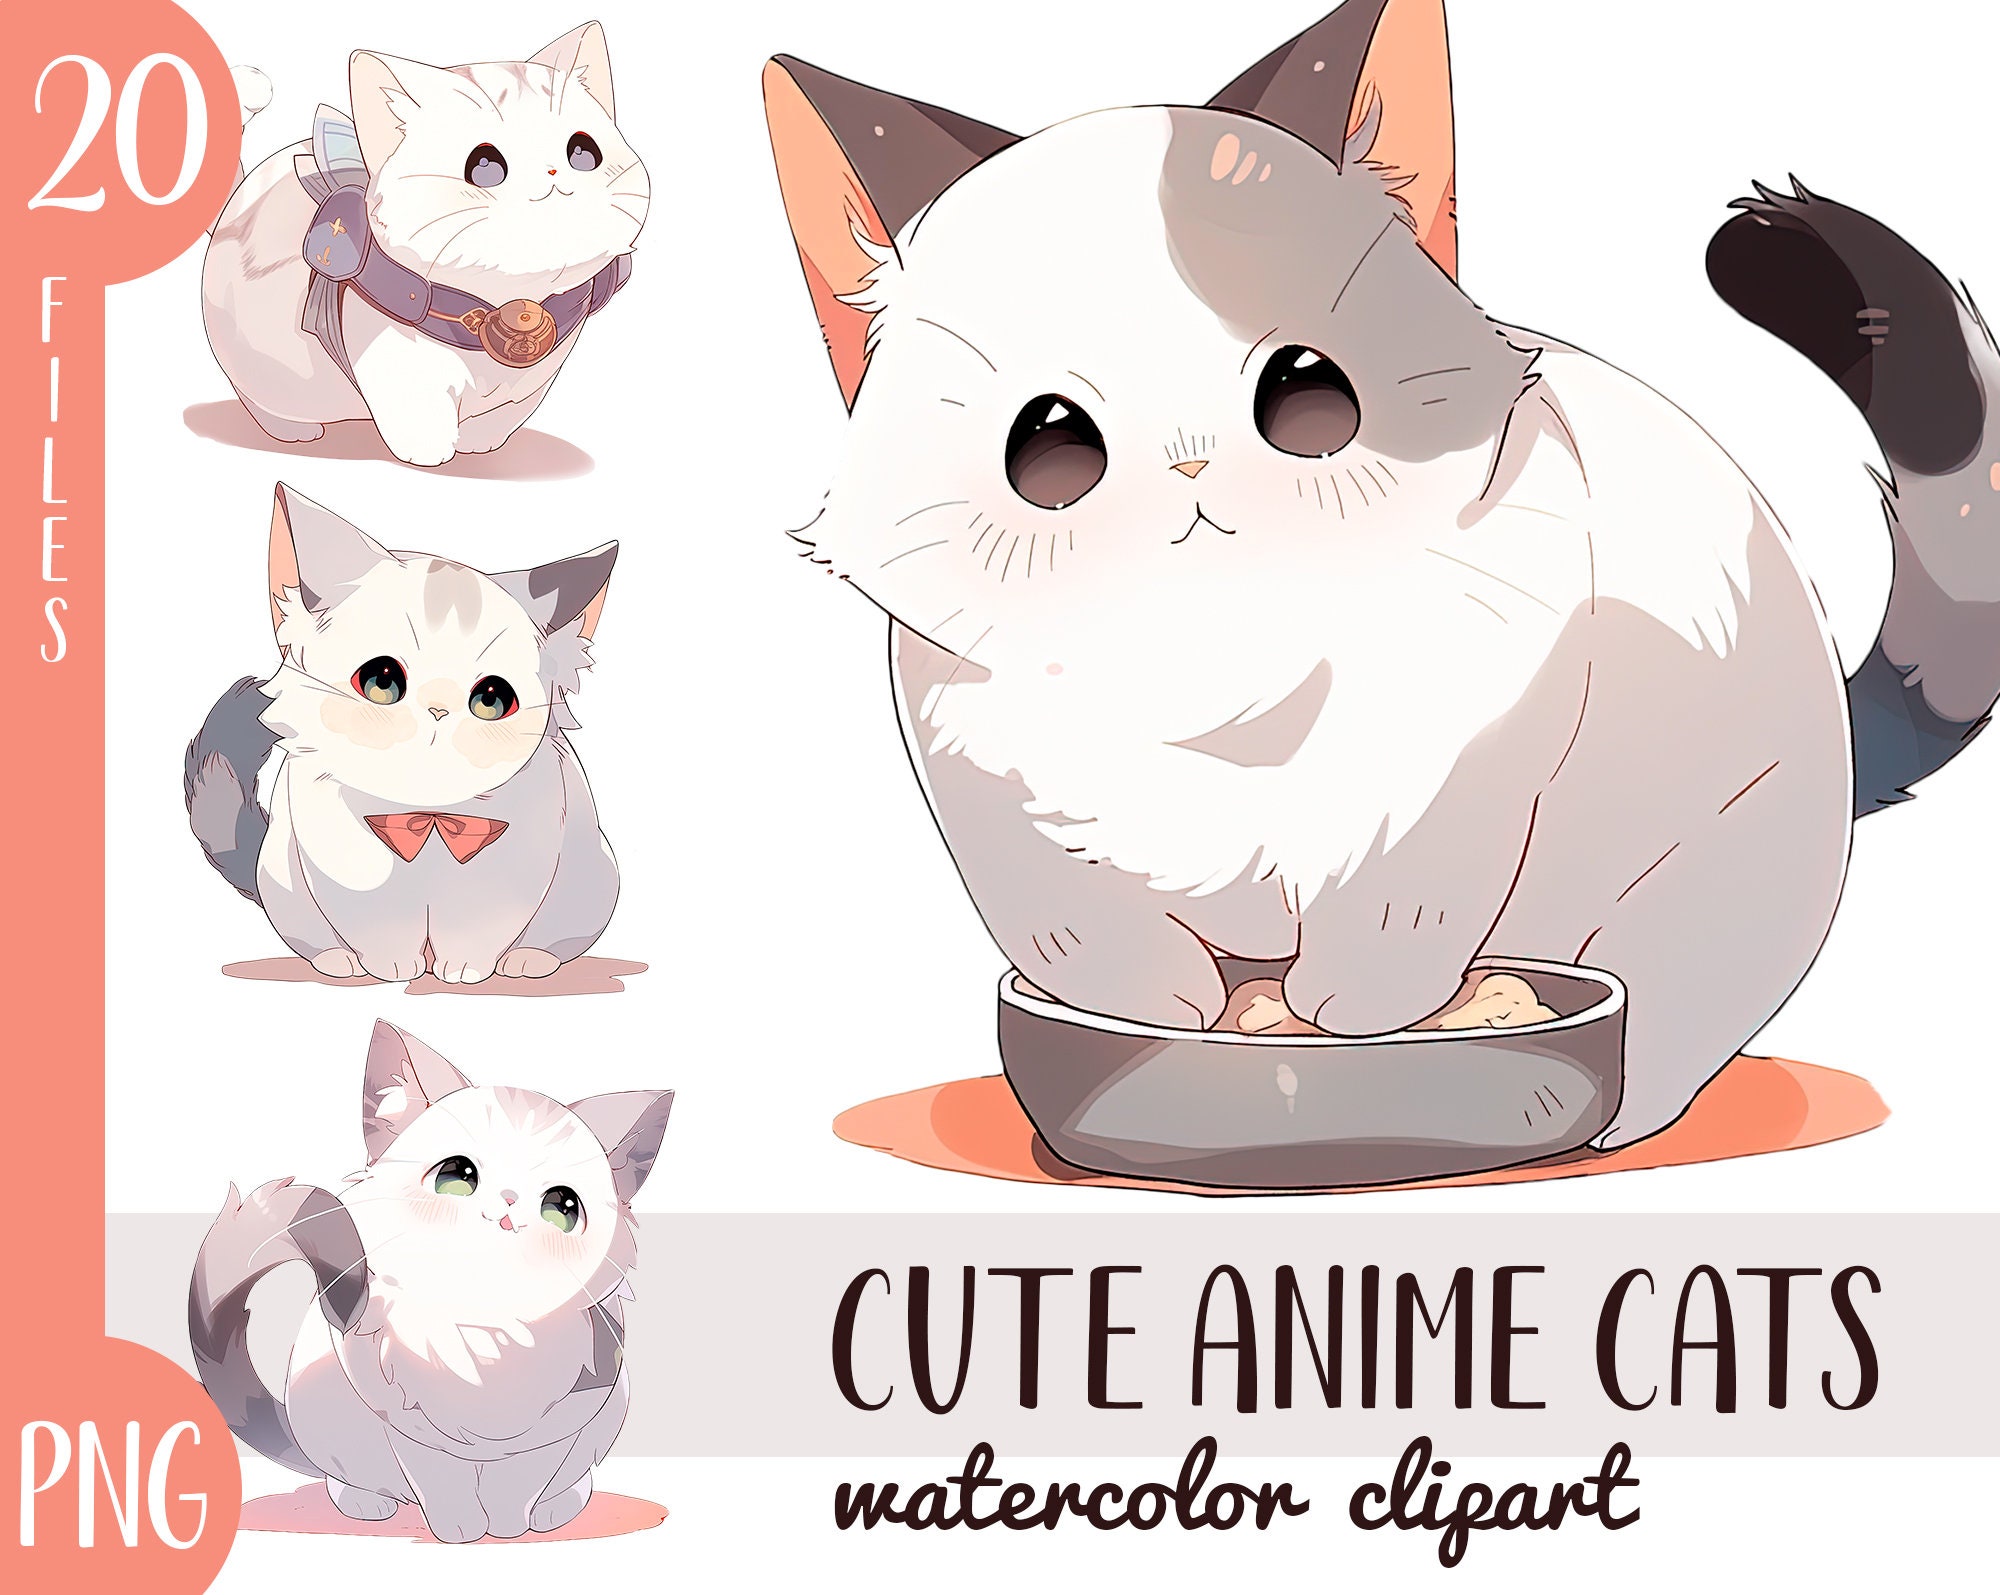 Anime Cat Stock Illustrations, Cliparts and Royalty Free Anime Cat Vectors